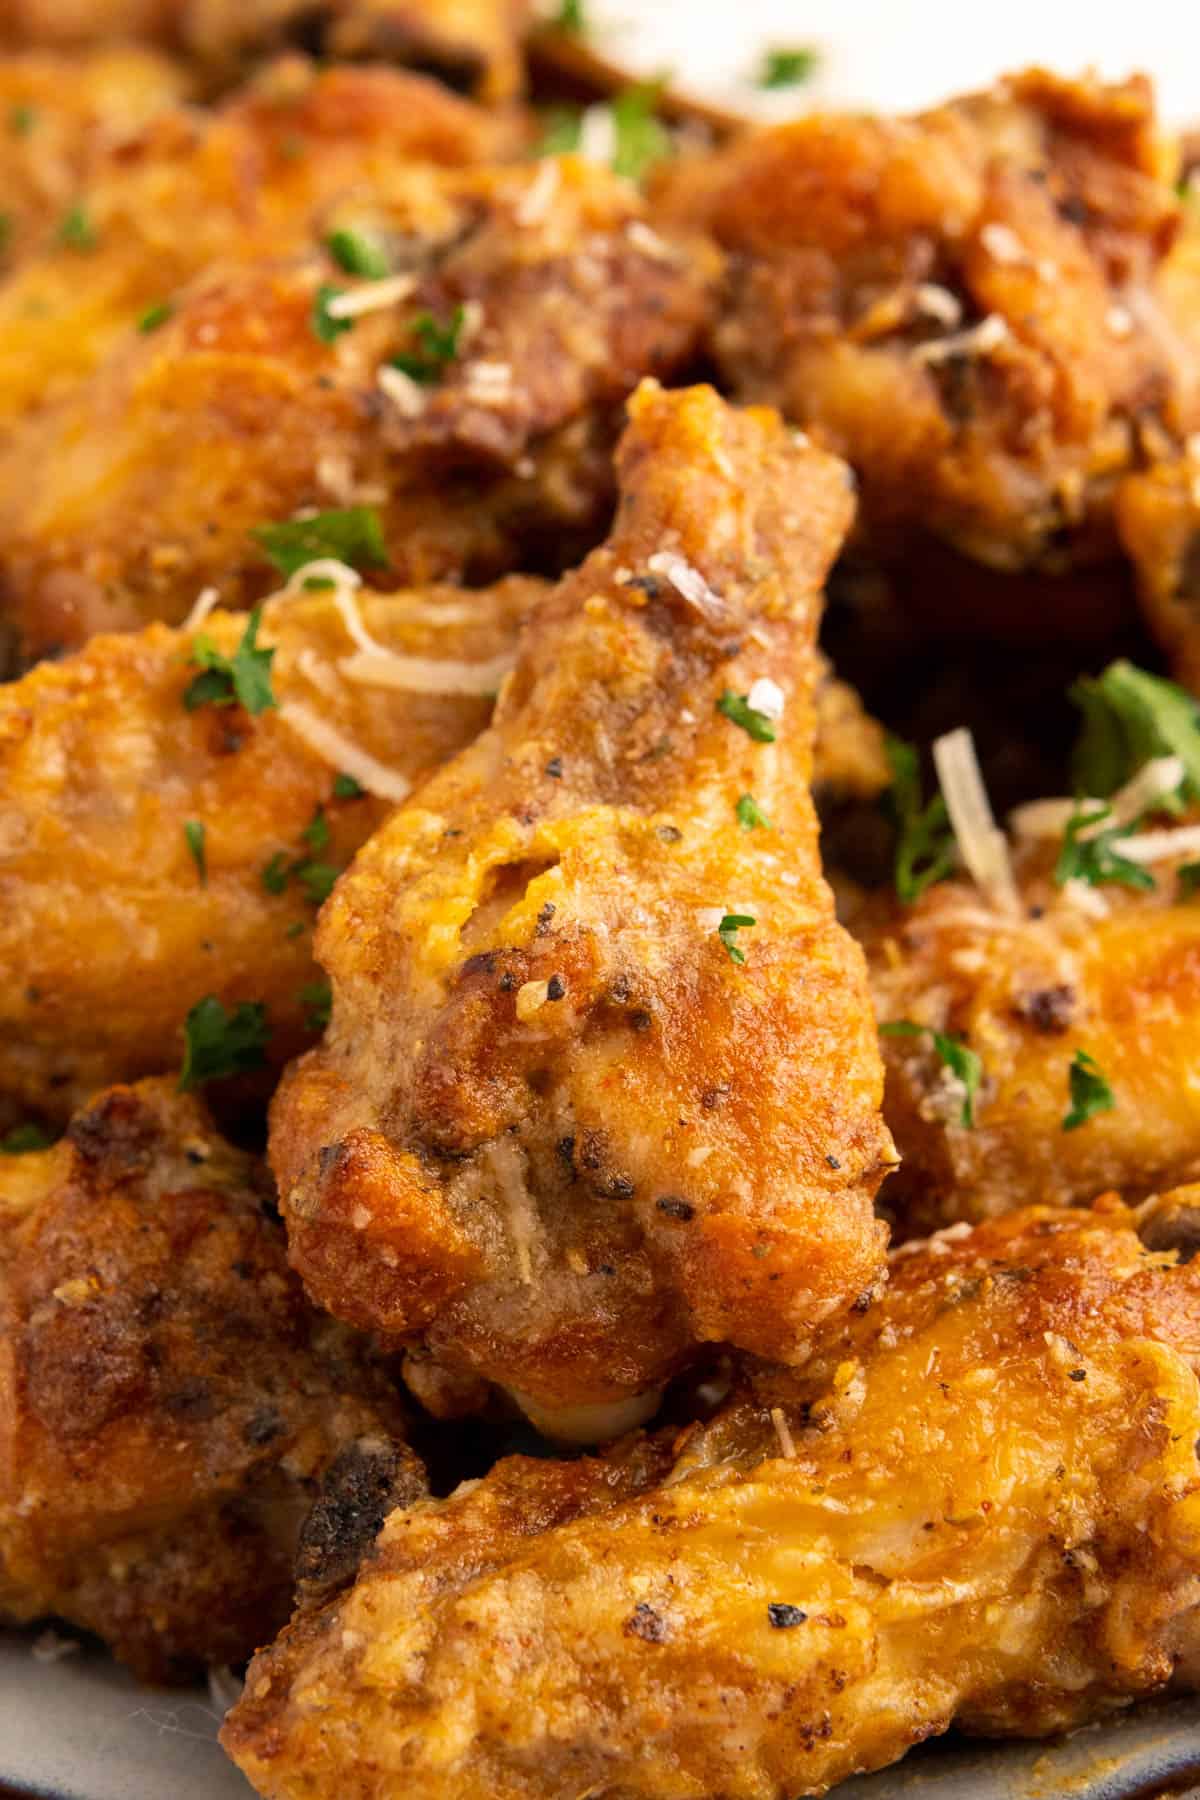 Extreme close up on one of the garlic parmesan wings served with fresh parsley and parmesan